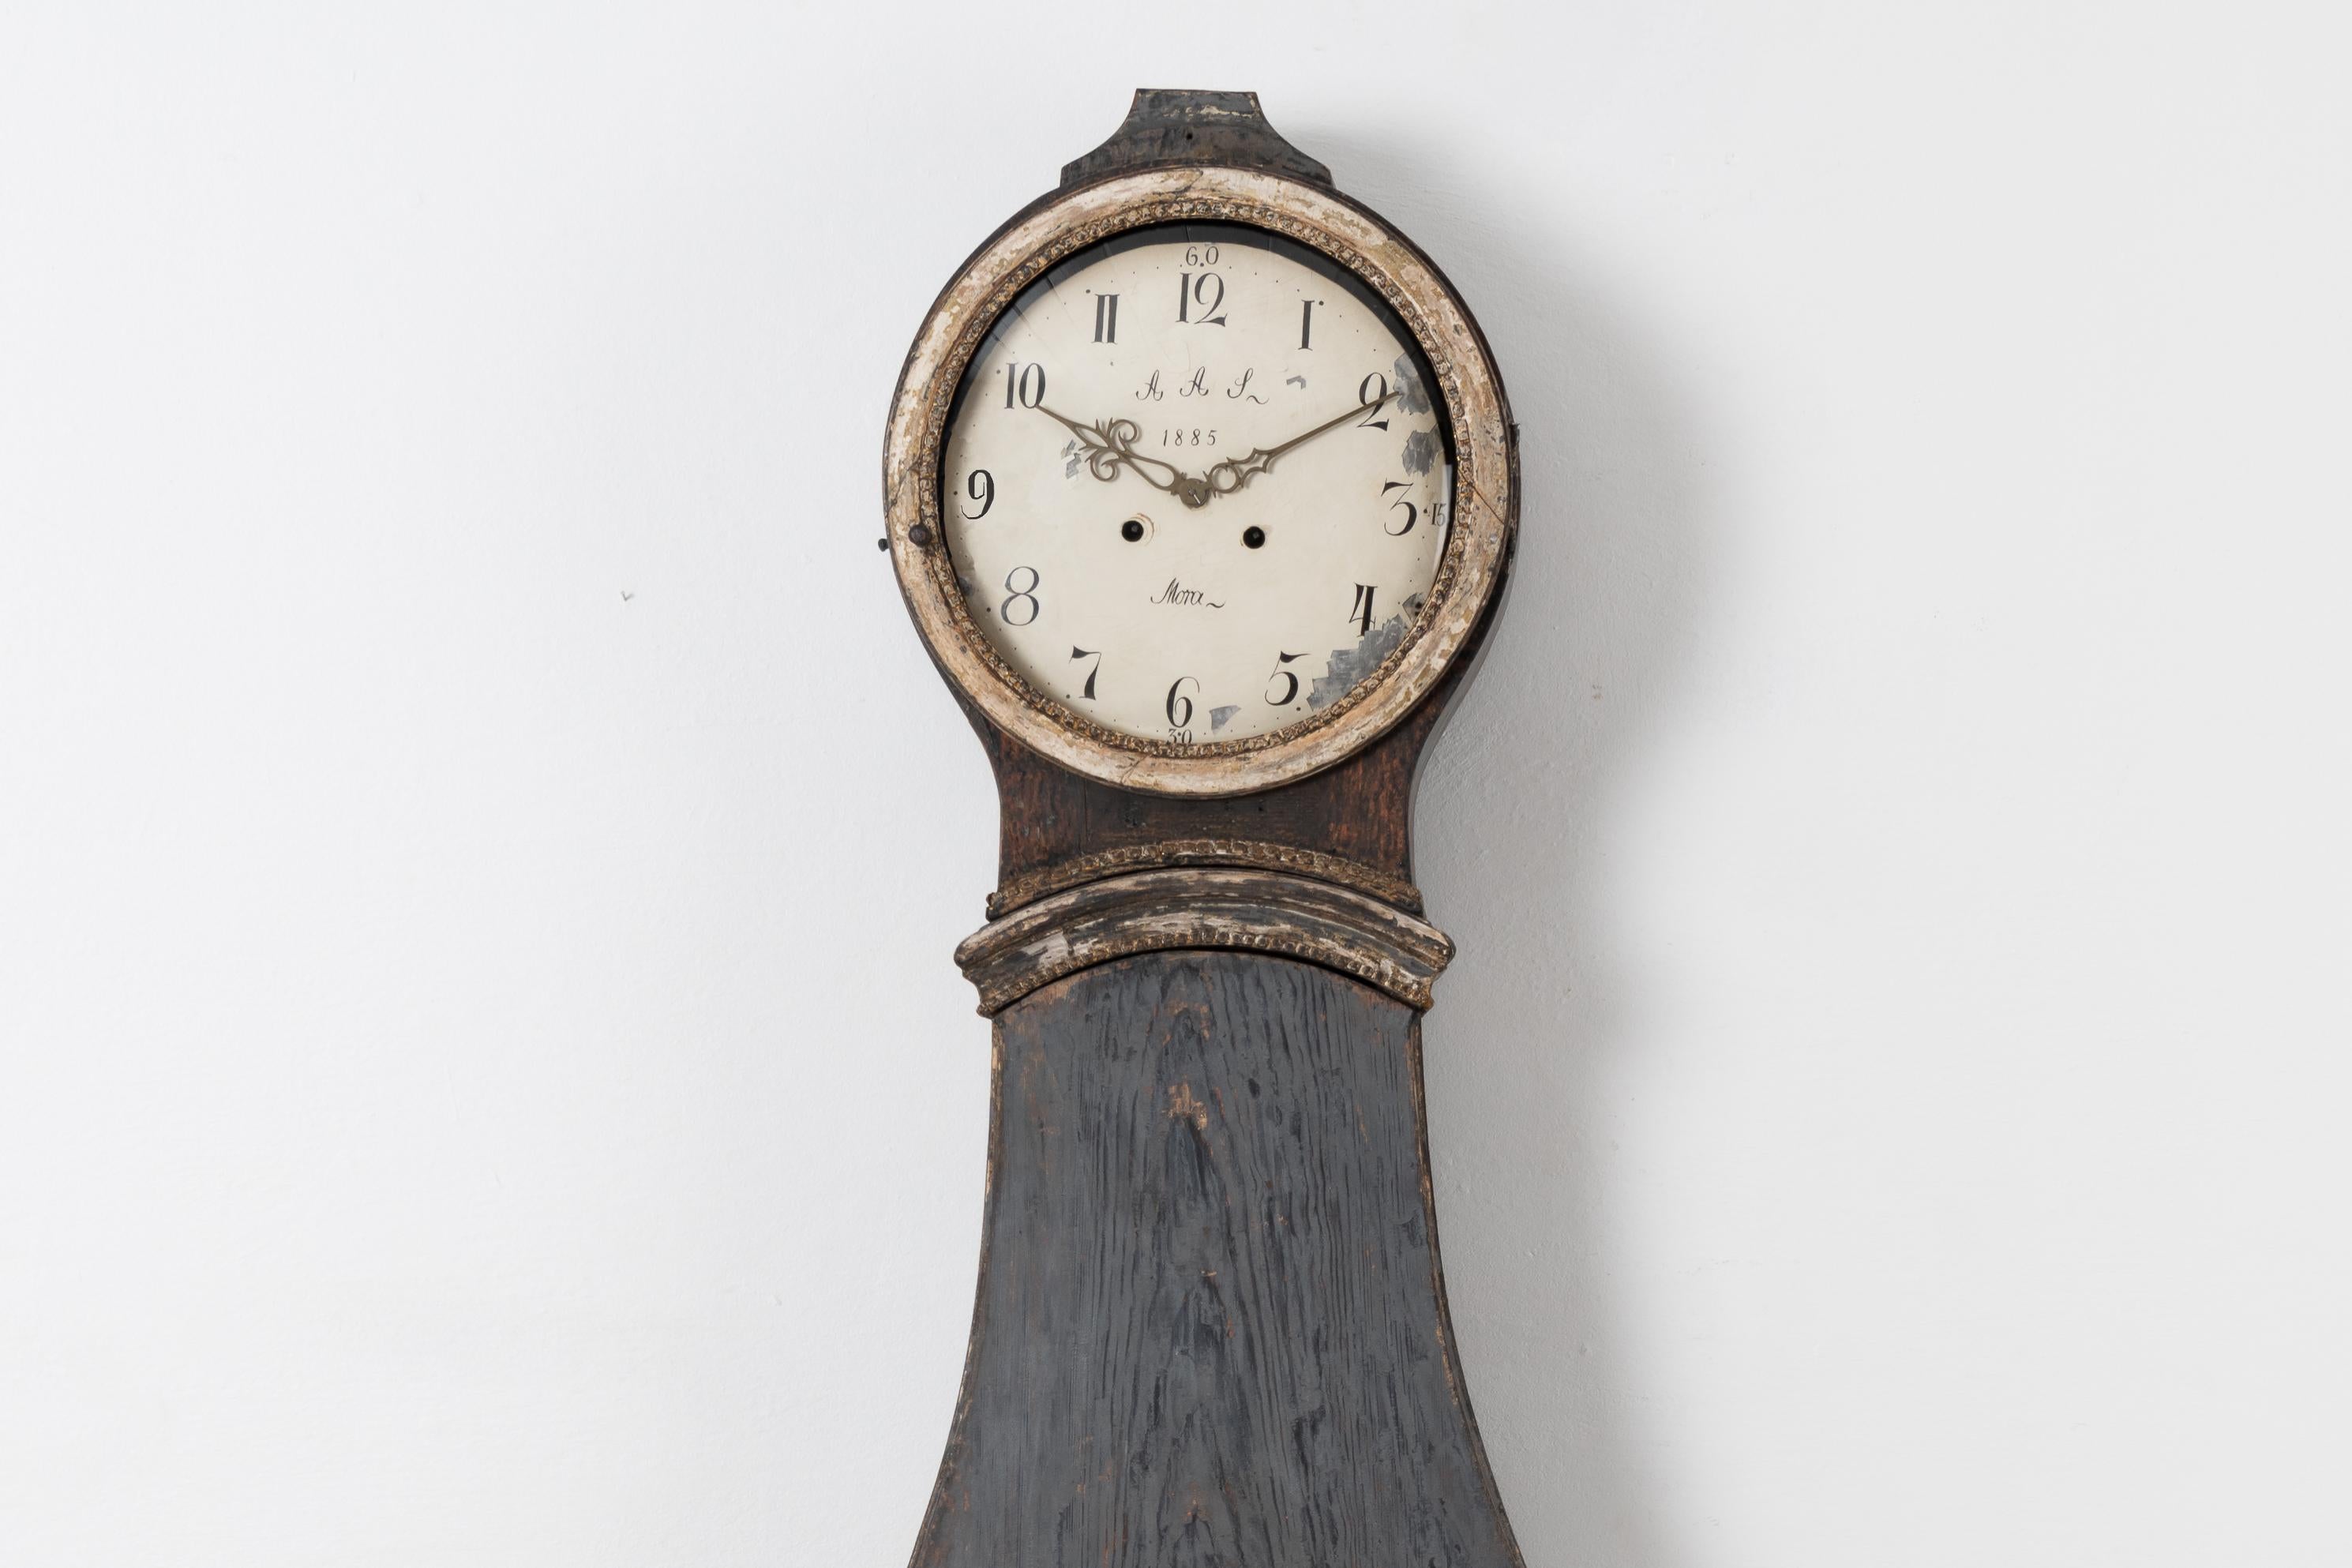 Rococo long case clock from the late 18th century with its origin in northern Sweden. The clock is pine with scarped to original paint. The end of the skirt has a very nice typical rococo shape and transition to the feet. Hand carved wooden decor